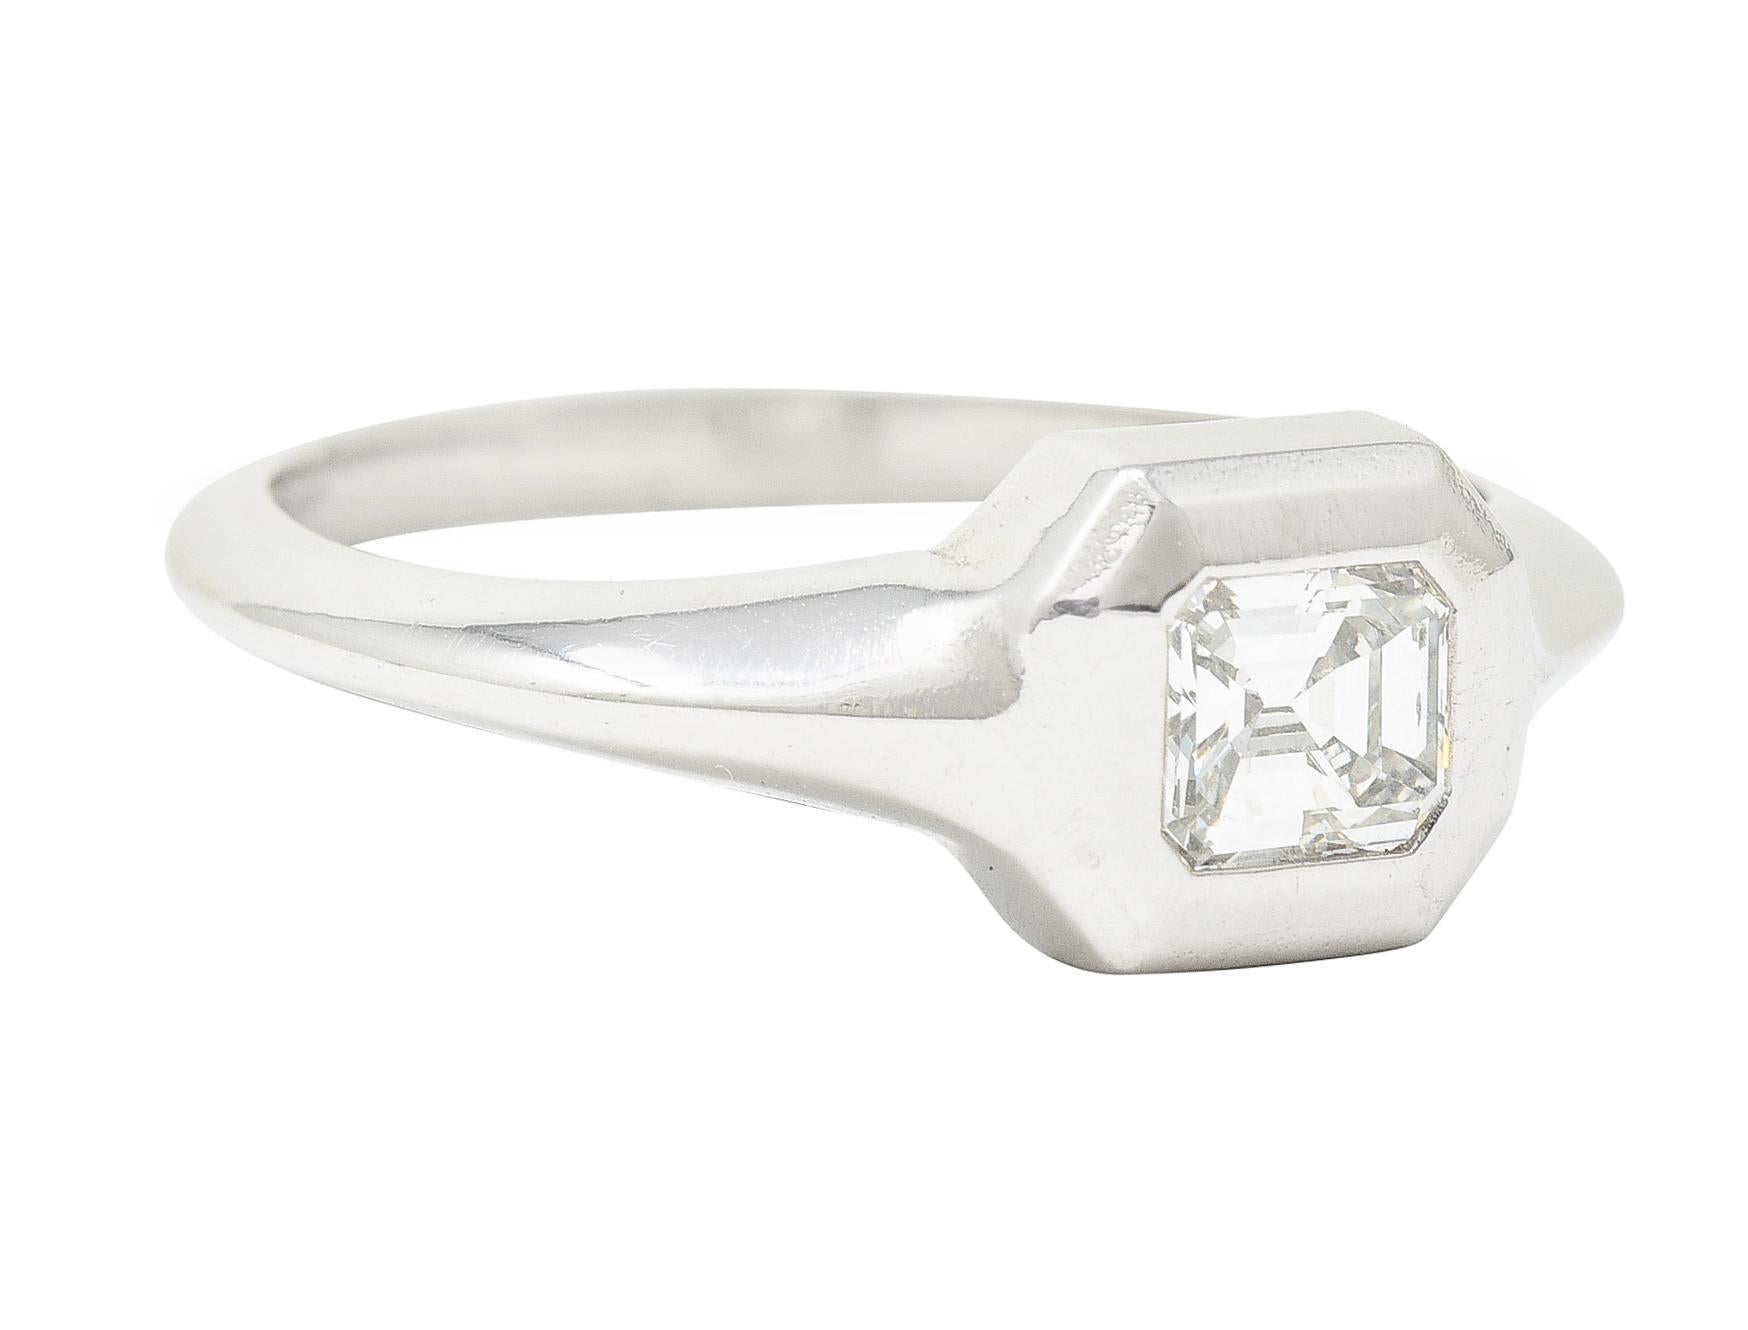 Centering an emerald cut diamond weighing approximately 0.50 carat total
G color with VS2 clarity
Flush set in a faceted octagonal form head
With a knife edge shank
Tested as platinum
Circa: 21st century
Ring size: 7 and sizable
Measures: North to